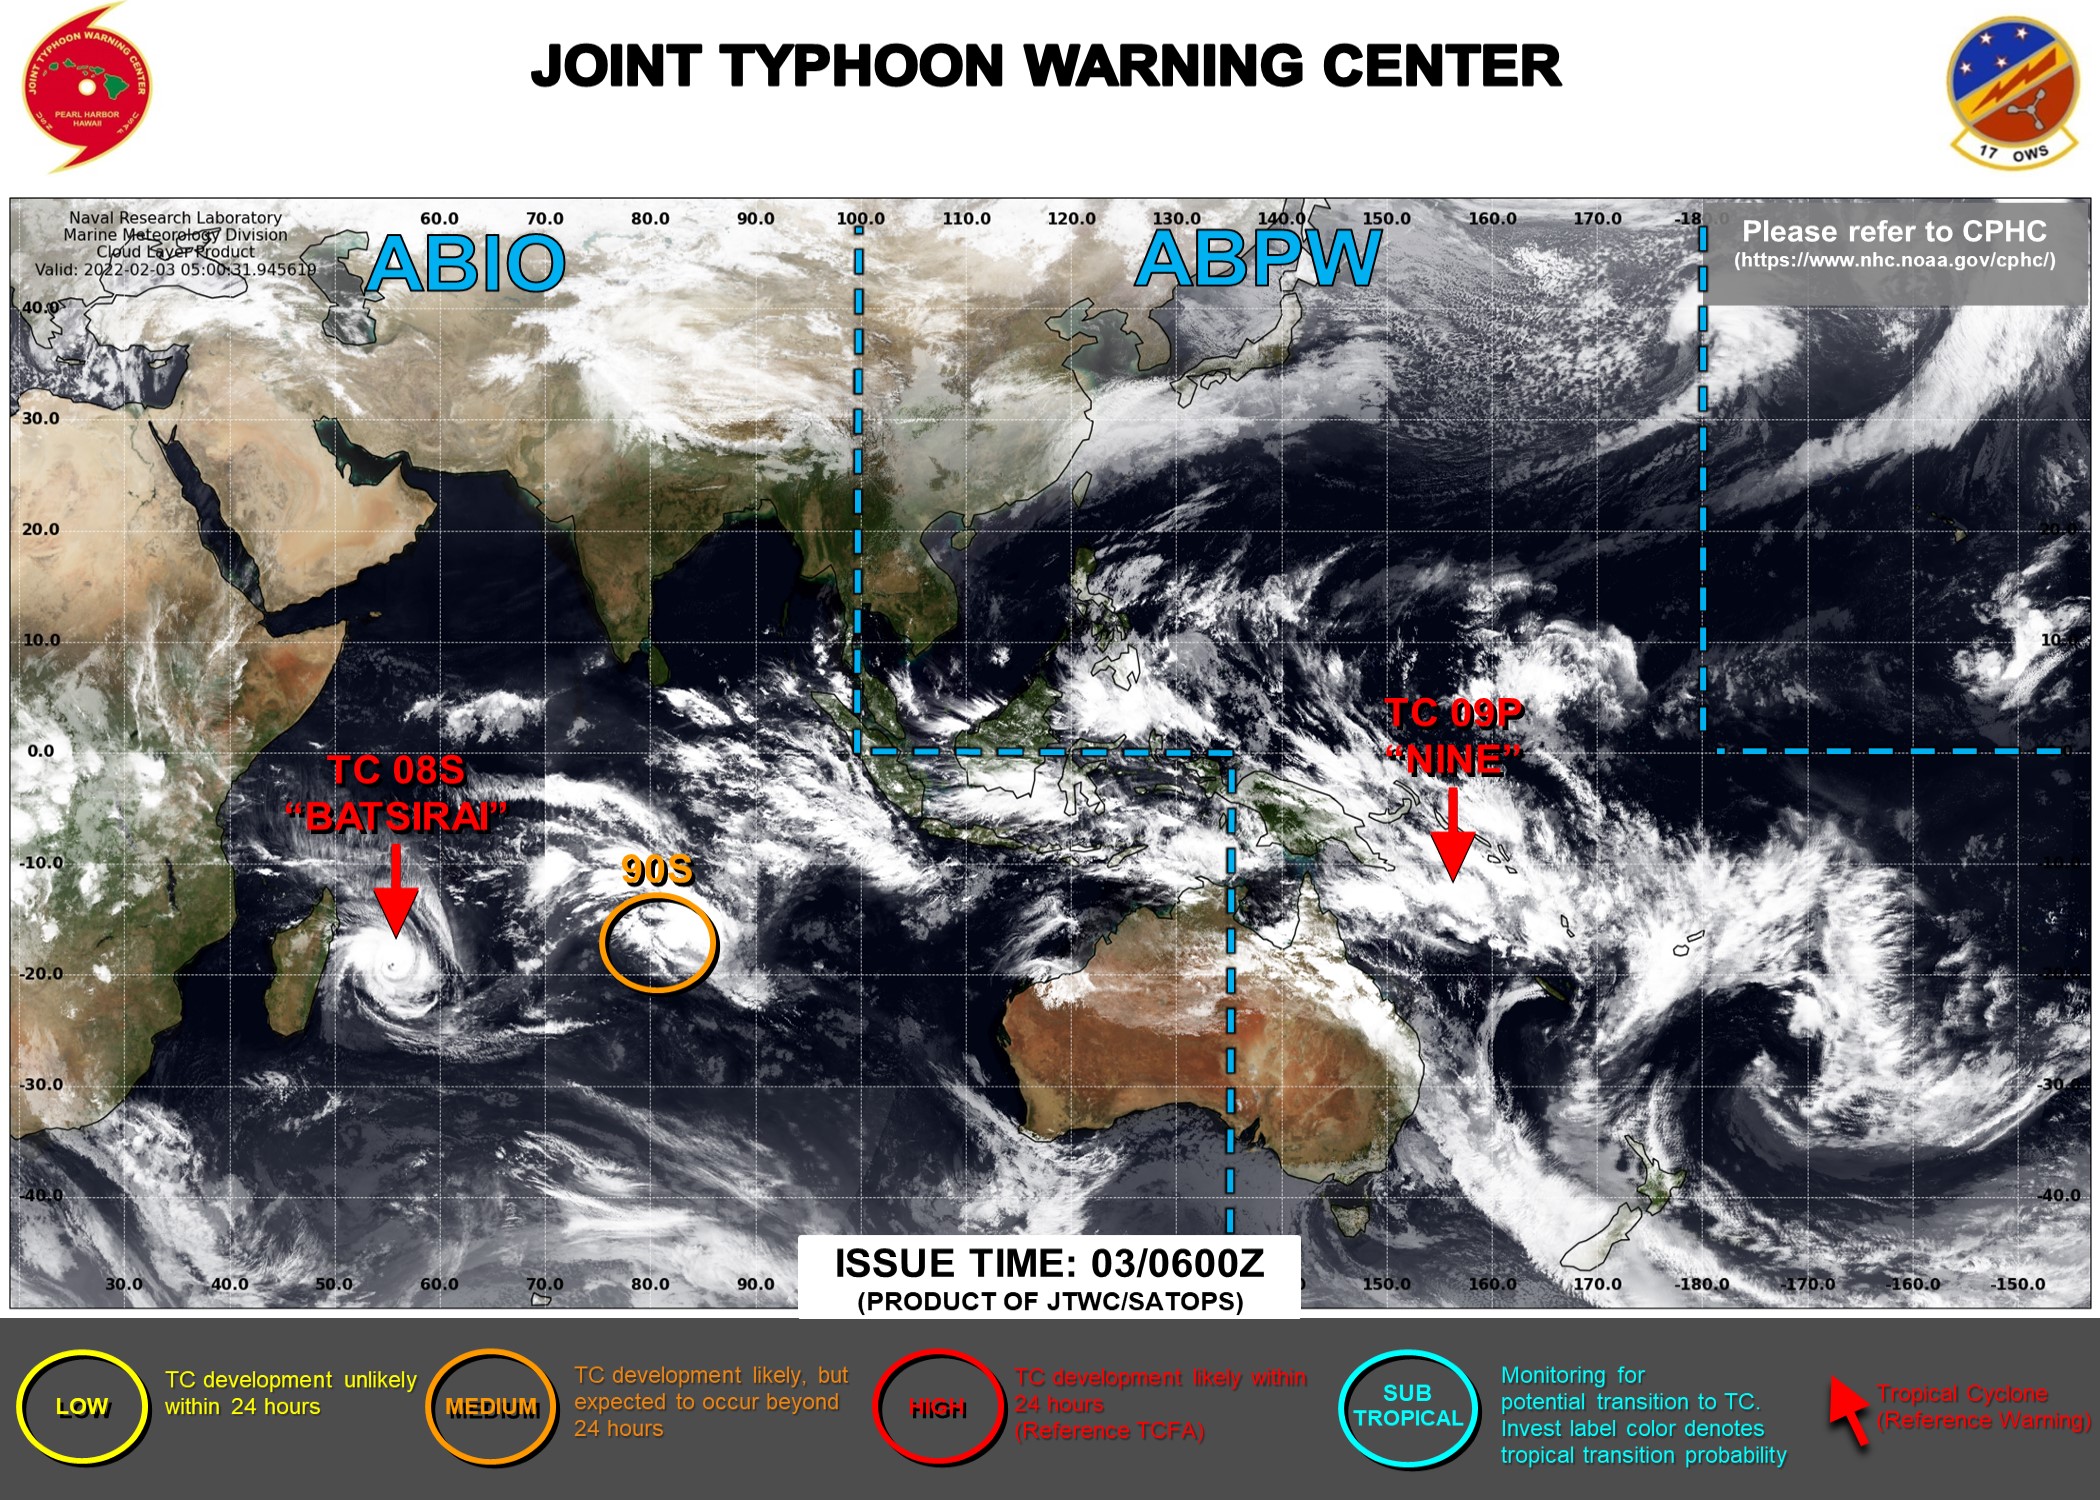 JTWC IS ISSUING 12HOURLY WARNINGS ON TC 08S(BATSIRAI) AND 6HOURLY WARNINGS ON TC 09P. 3HOURLY SATELLITE BULLETINS ARE ISSUED ON 08S, 09P AND INVEST 90S.